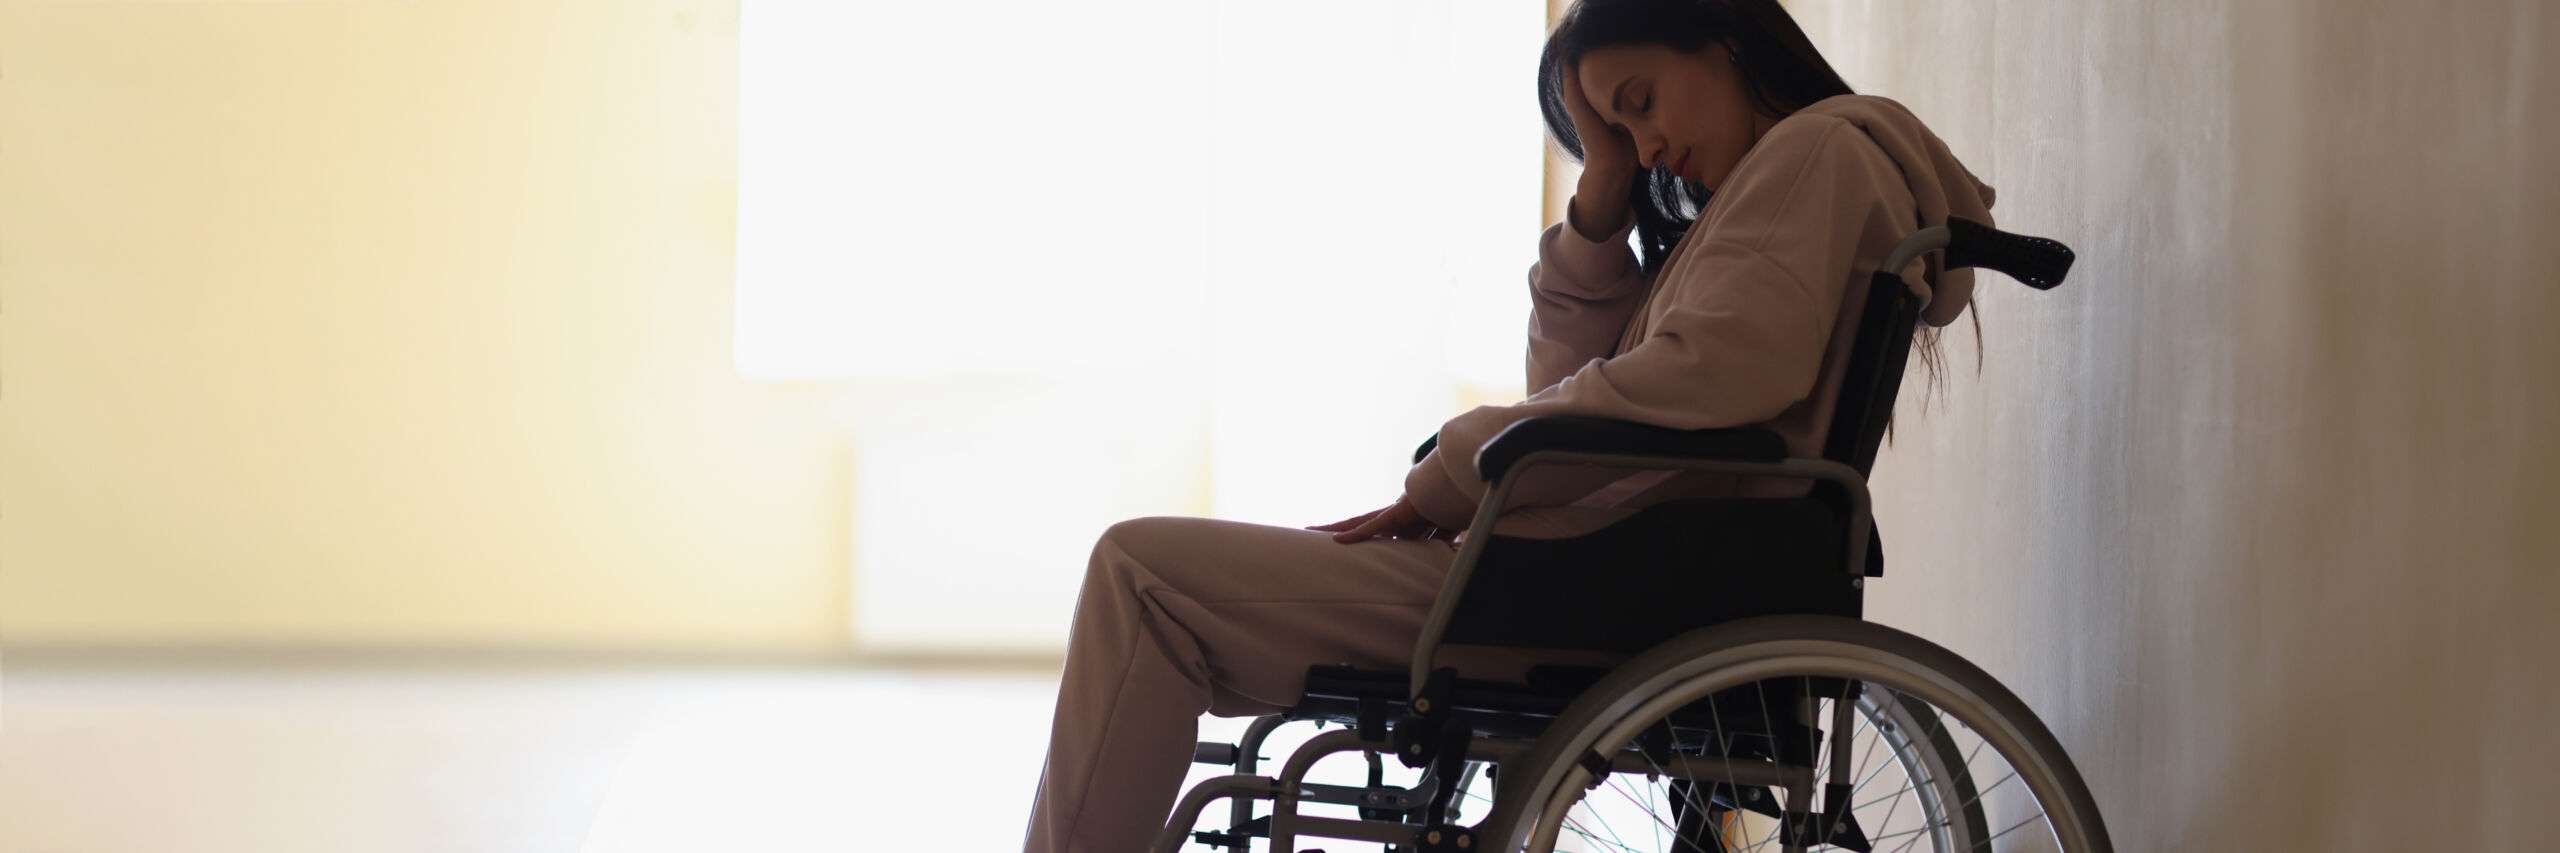 Sad woman sitting in wheelchair in rehabilitation center. Psychological assistance for people with disabilities concept